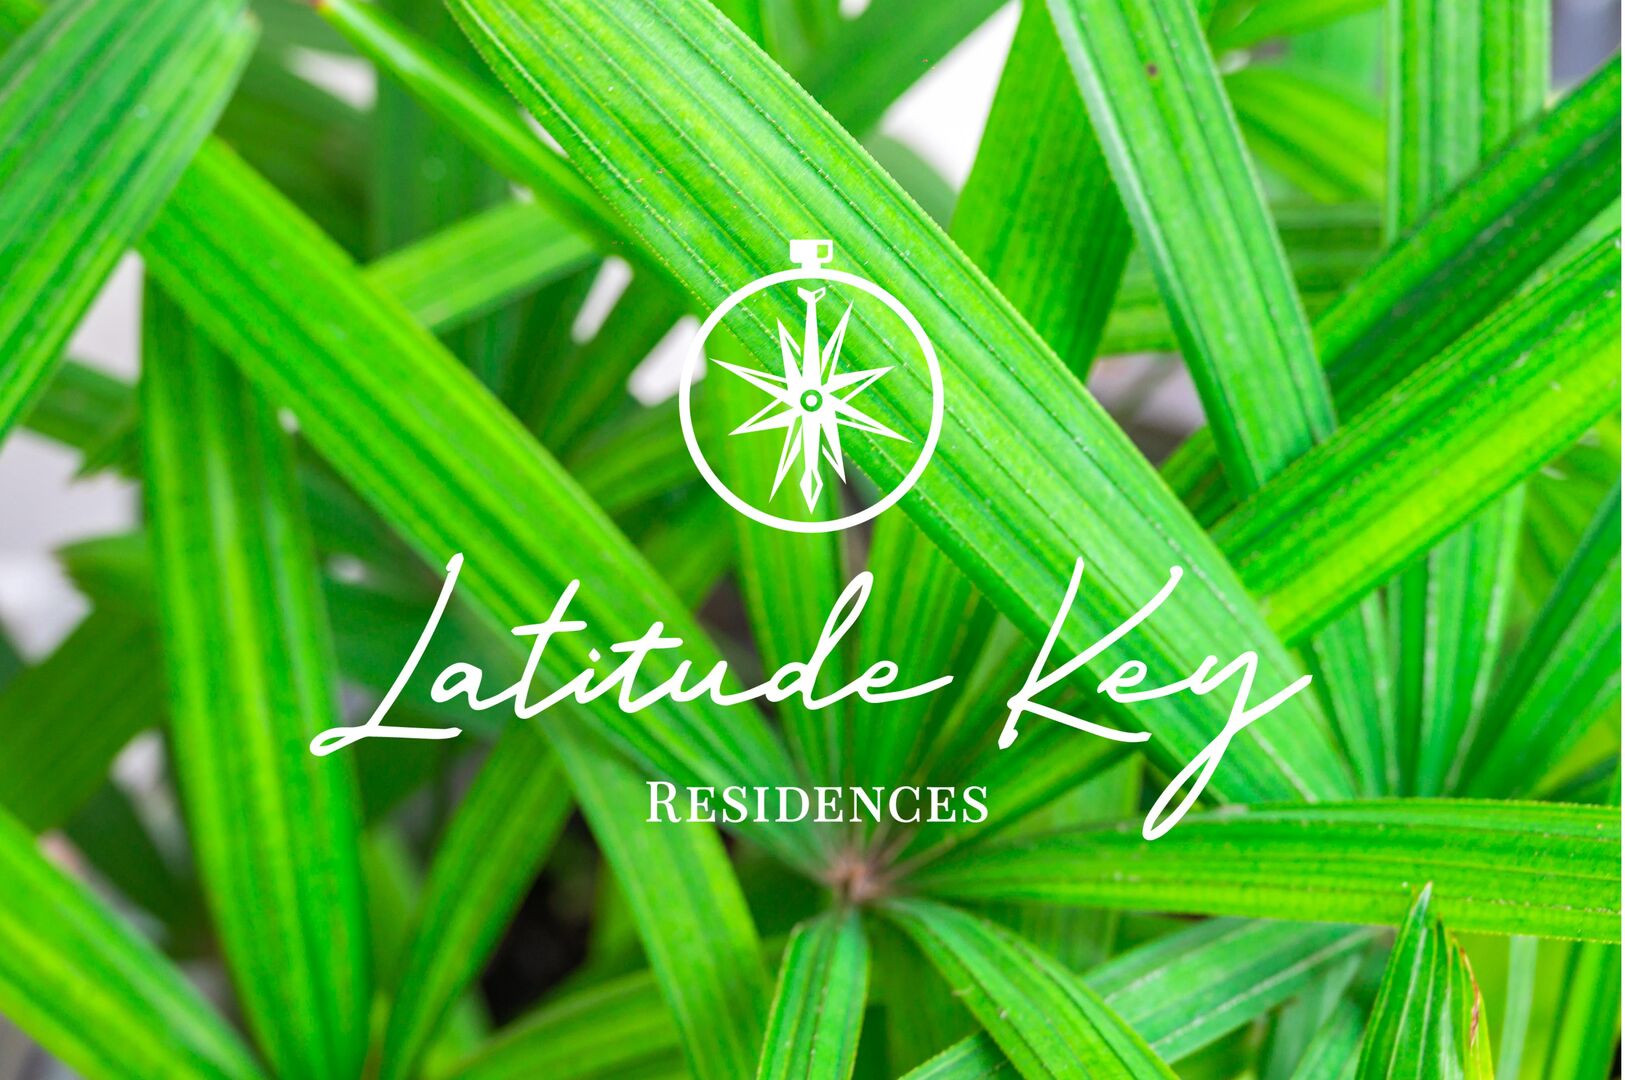 Sun Key is part of the Residences Collection. Enjoy a stress free vacation with Latitude Key - Curated Vacation Properties